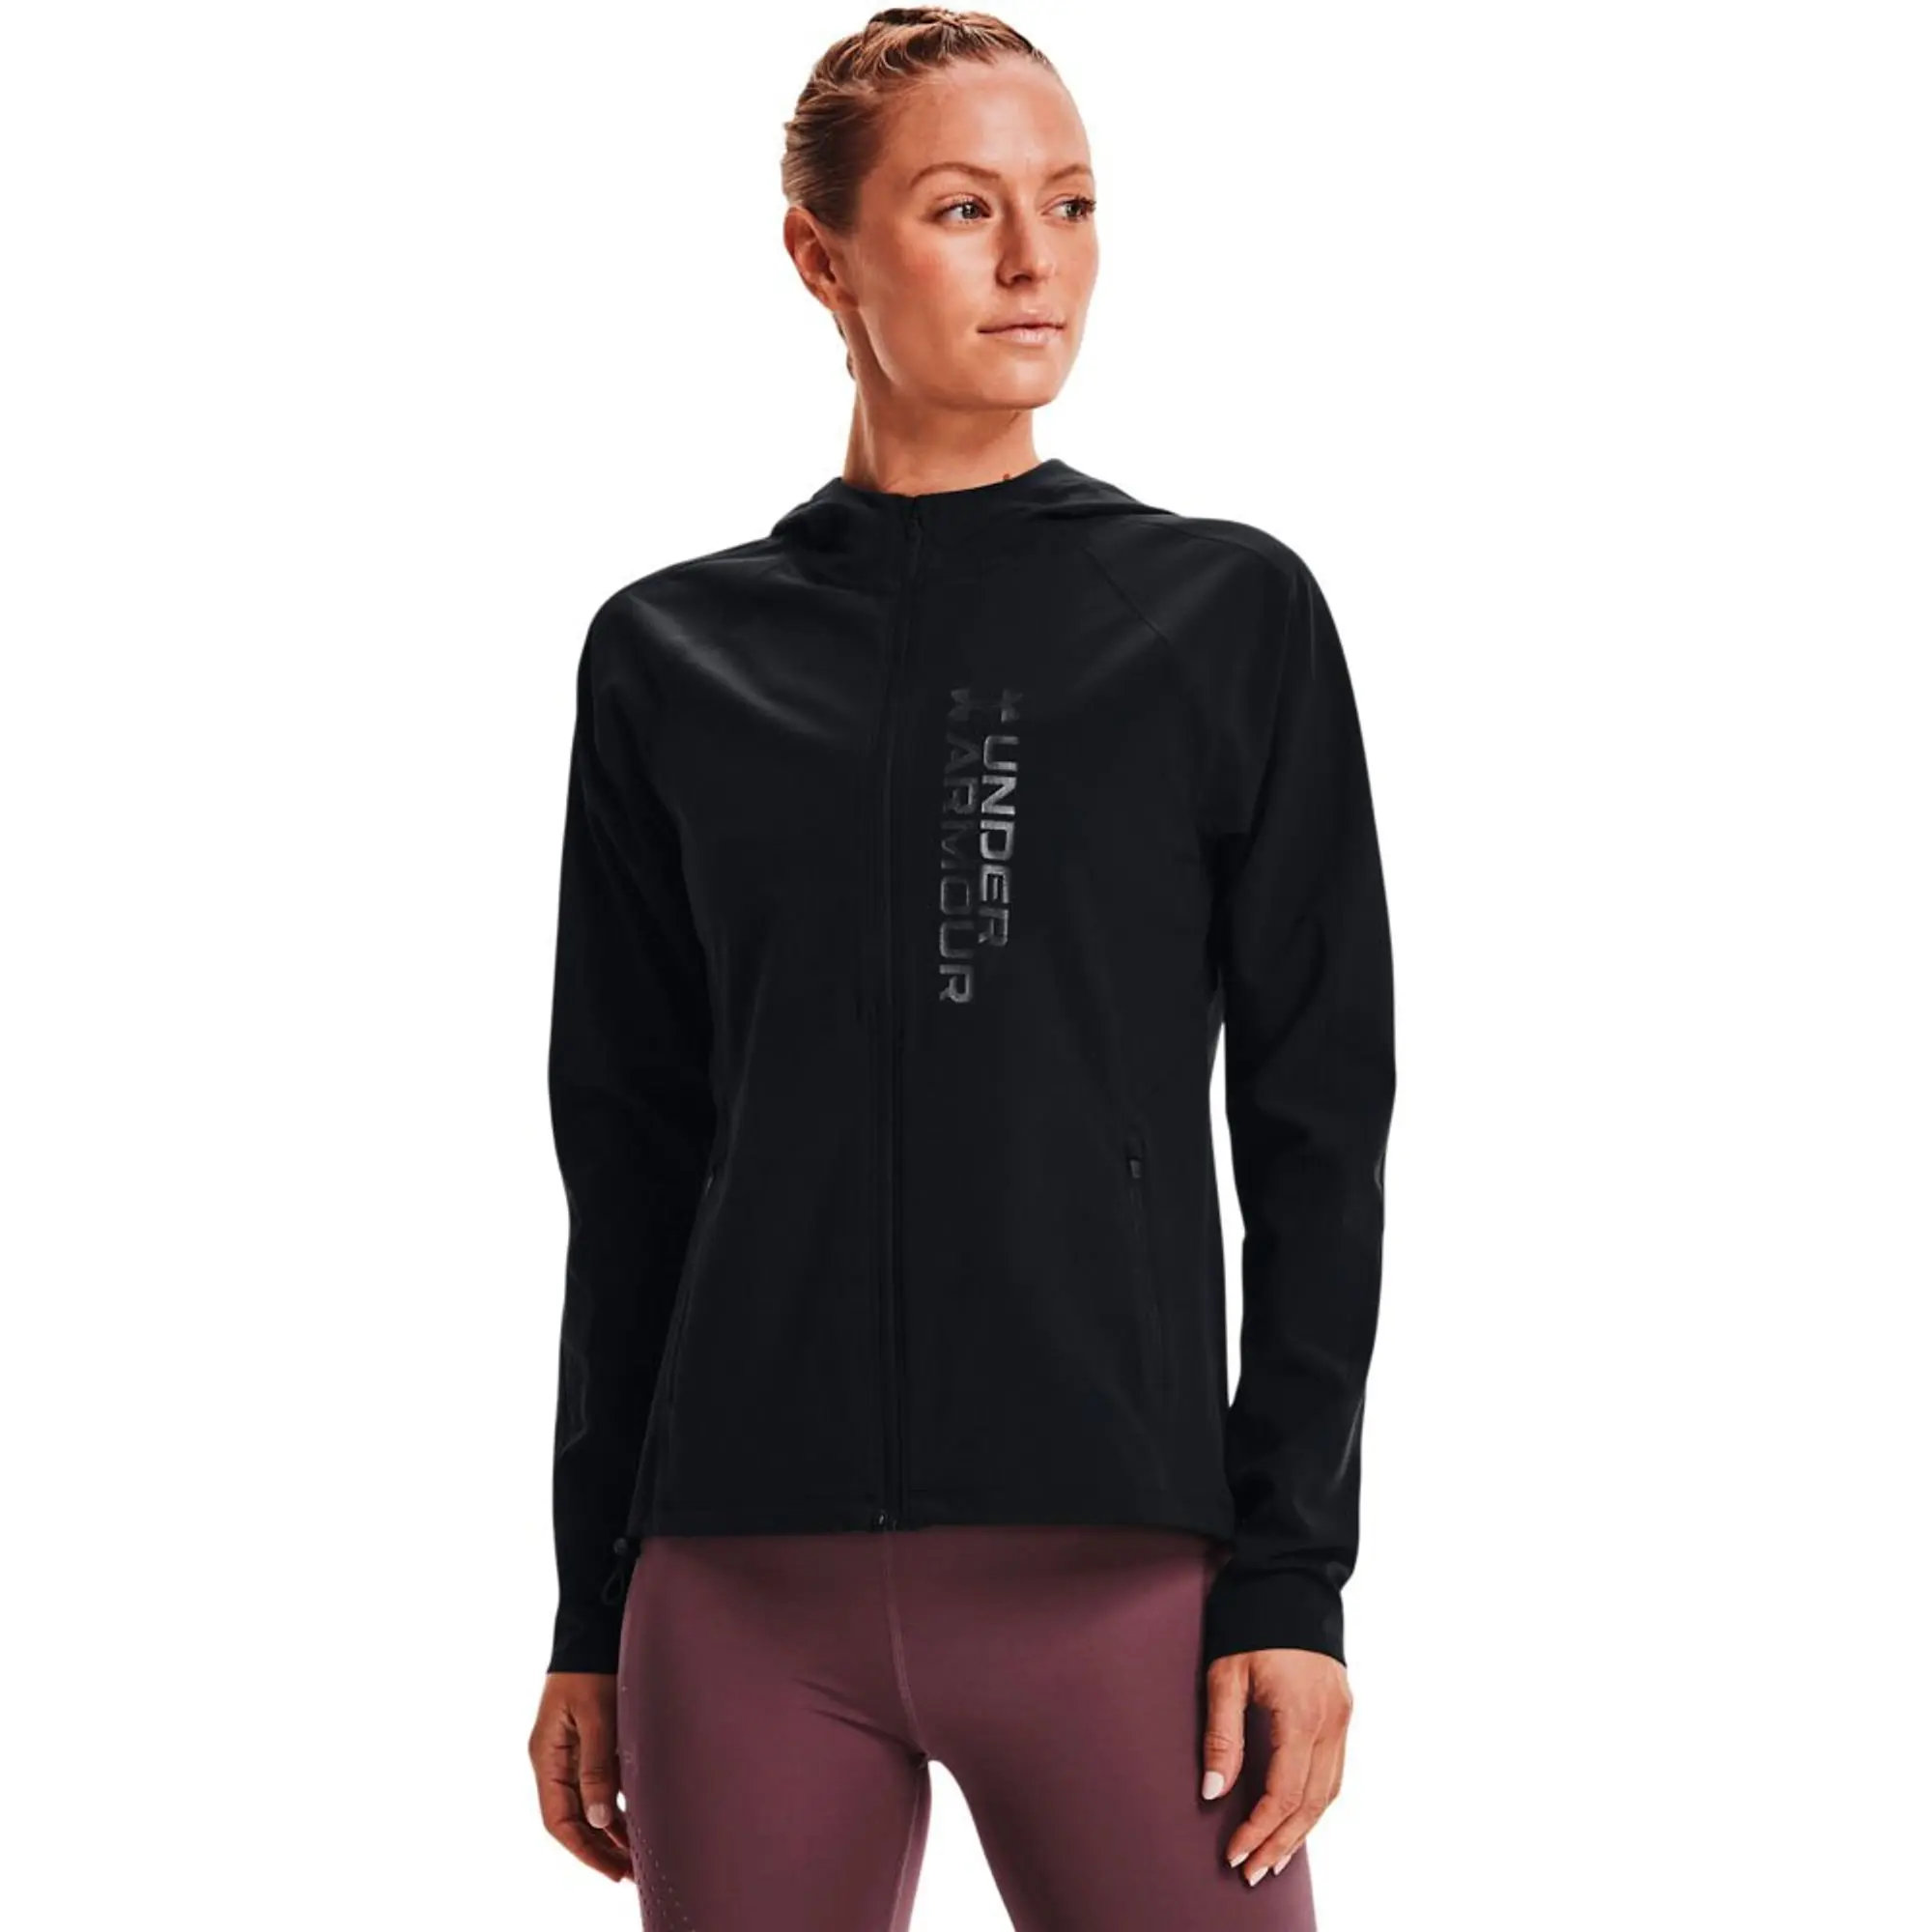 Under Armour Outrun Storm Jacket Womens - Black